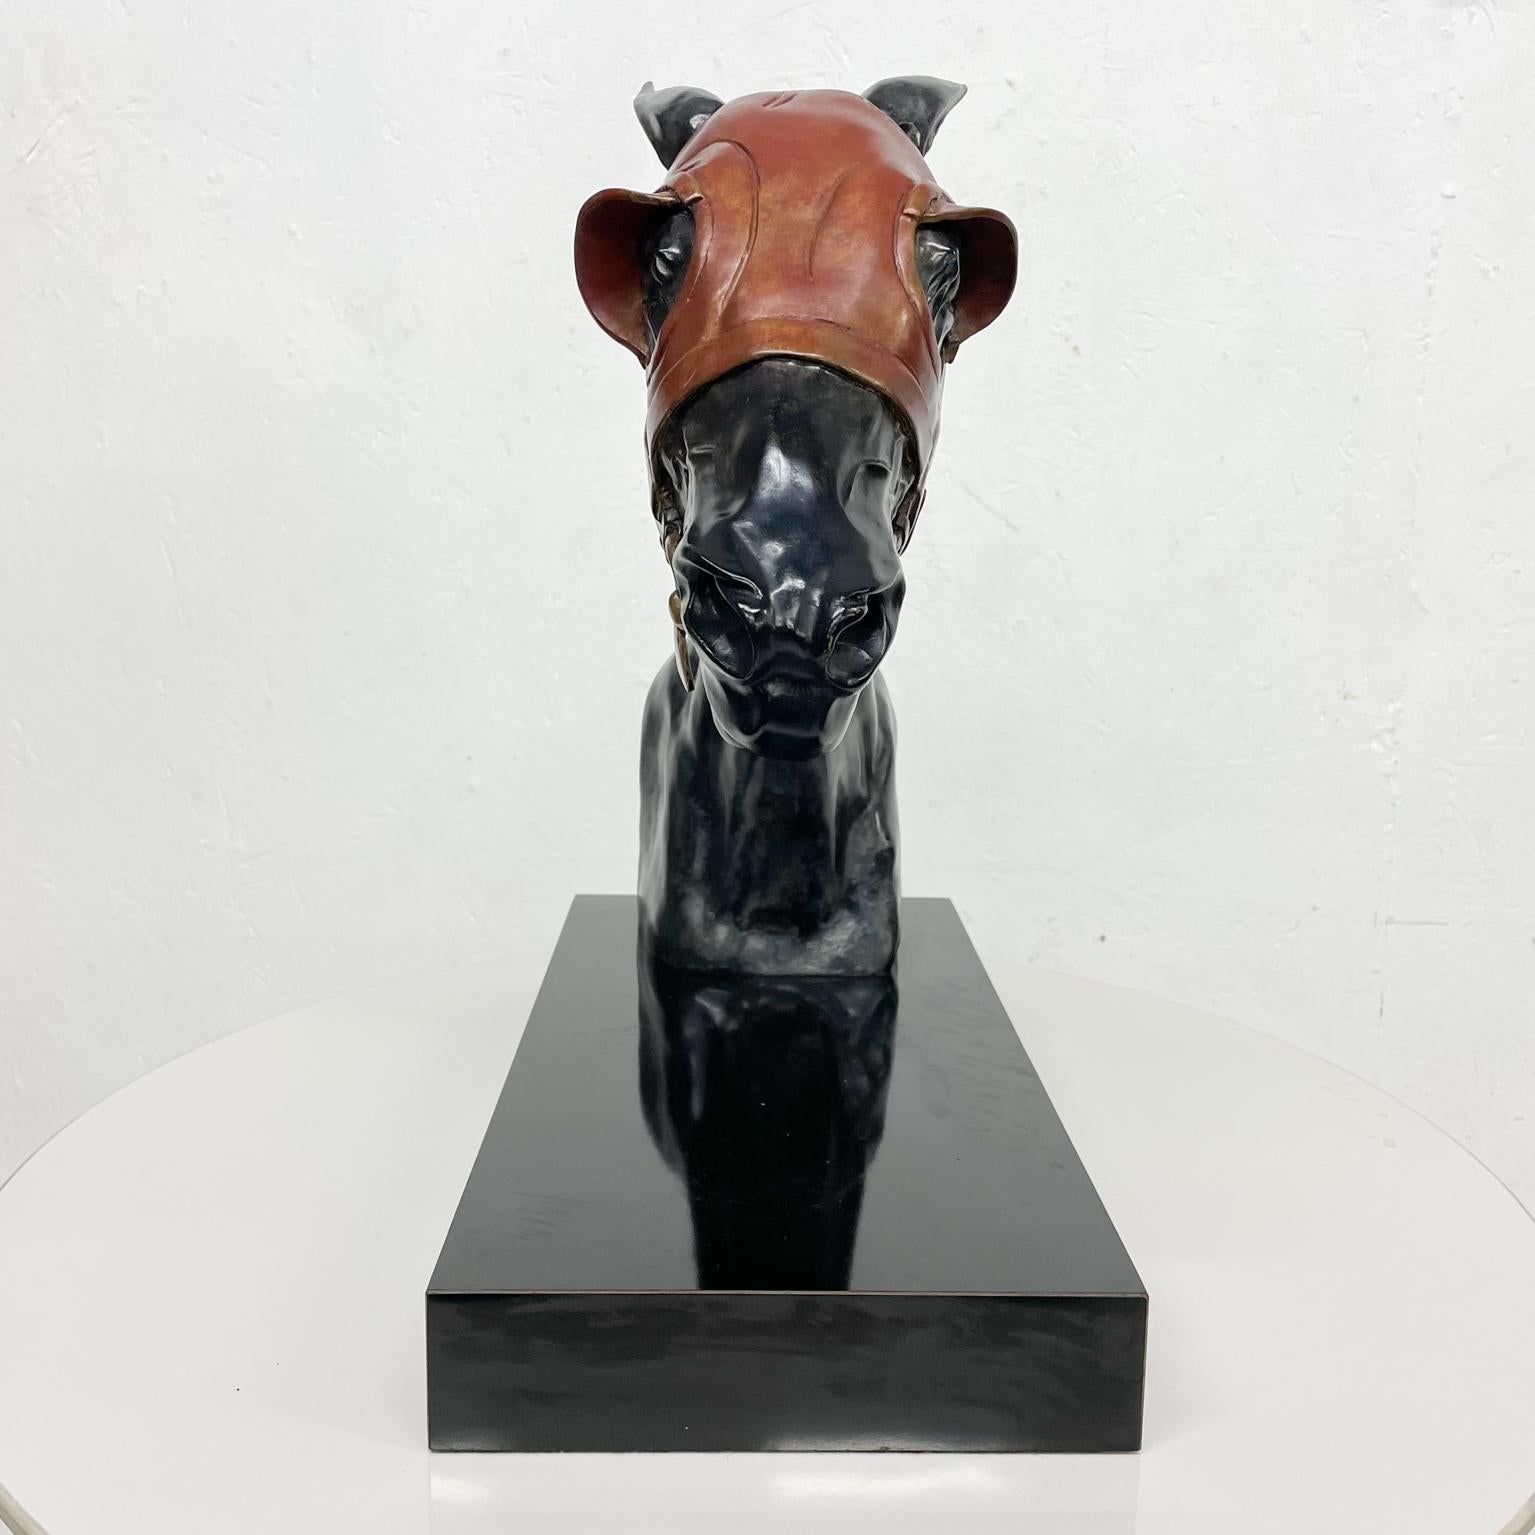 Studio Artist Pam Foss Racehorse Head with Blinker Hood in Bronze Formica Stone Wood Bronze Sculpture
Signed and numbered by artist Pam Foss
16.5 h x 8.13 w x 16 d inches
Original preowned vintage unrestored condition.
Refer to images provided.